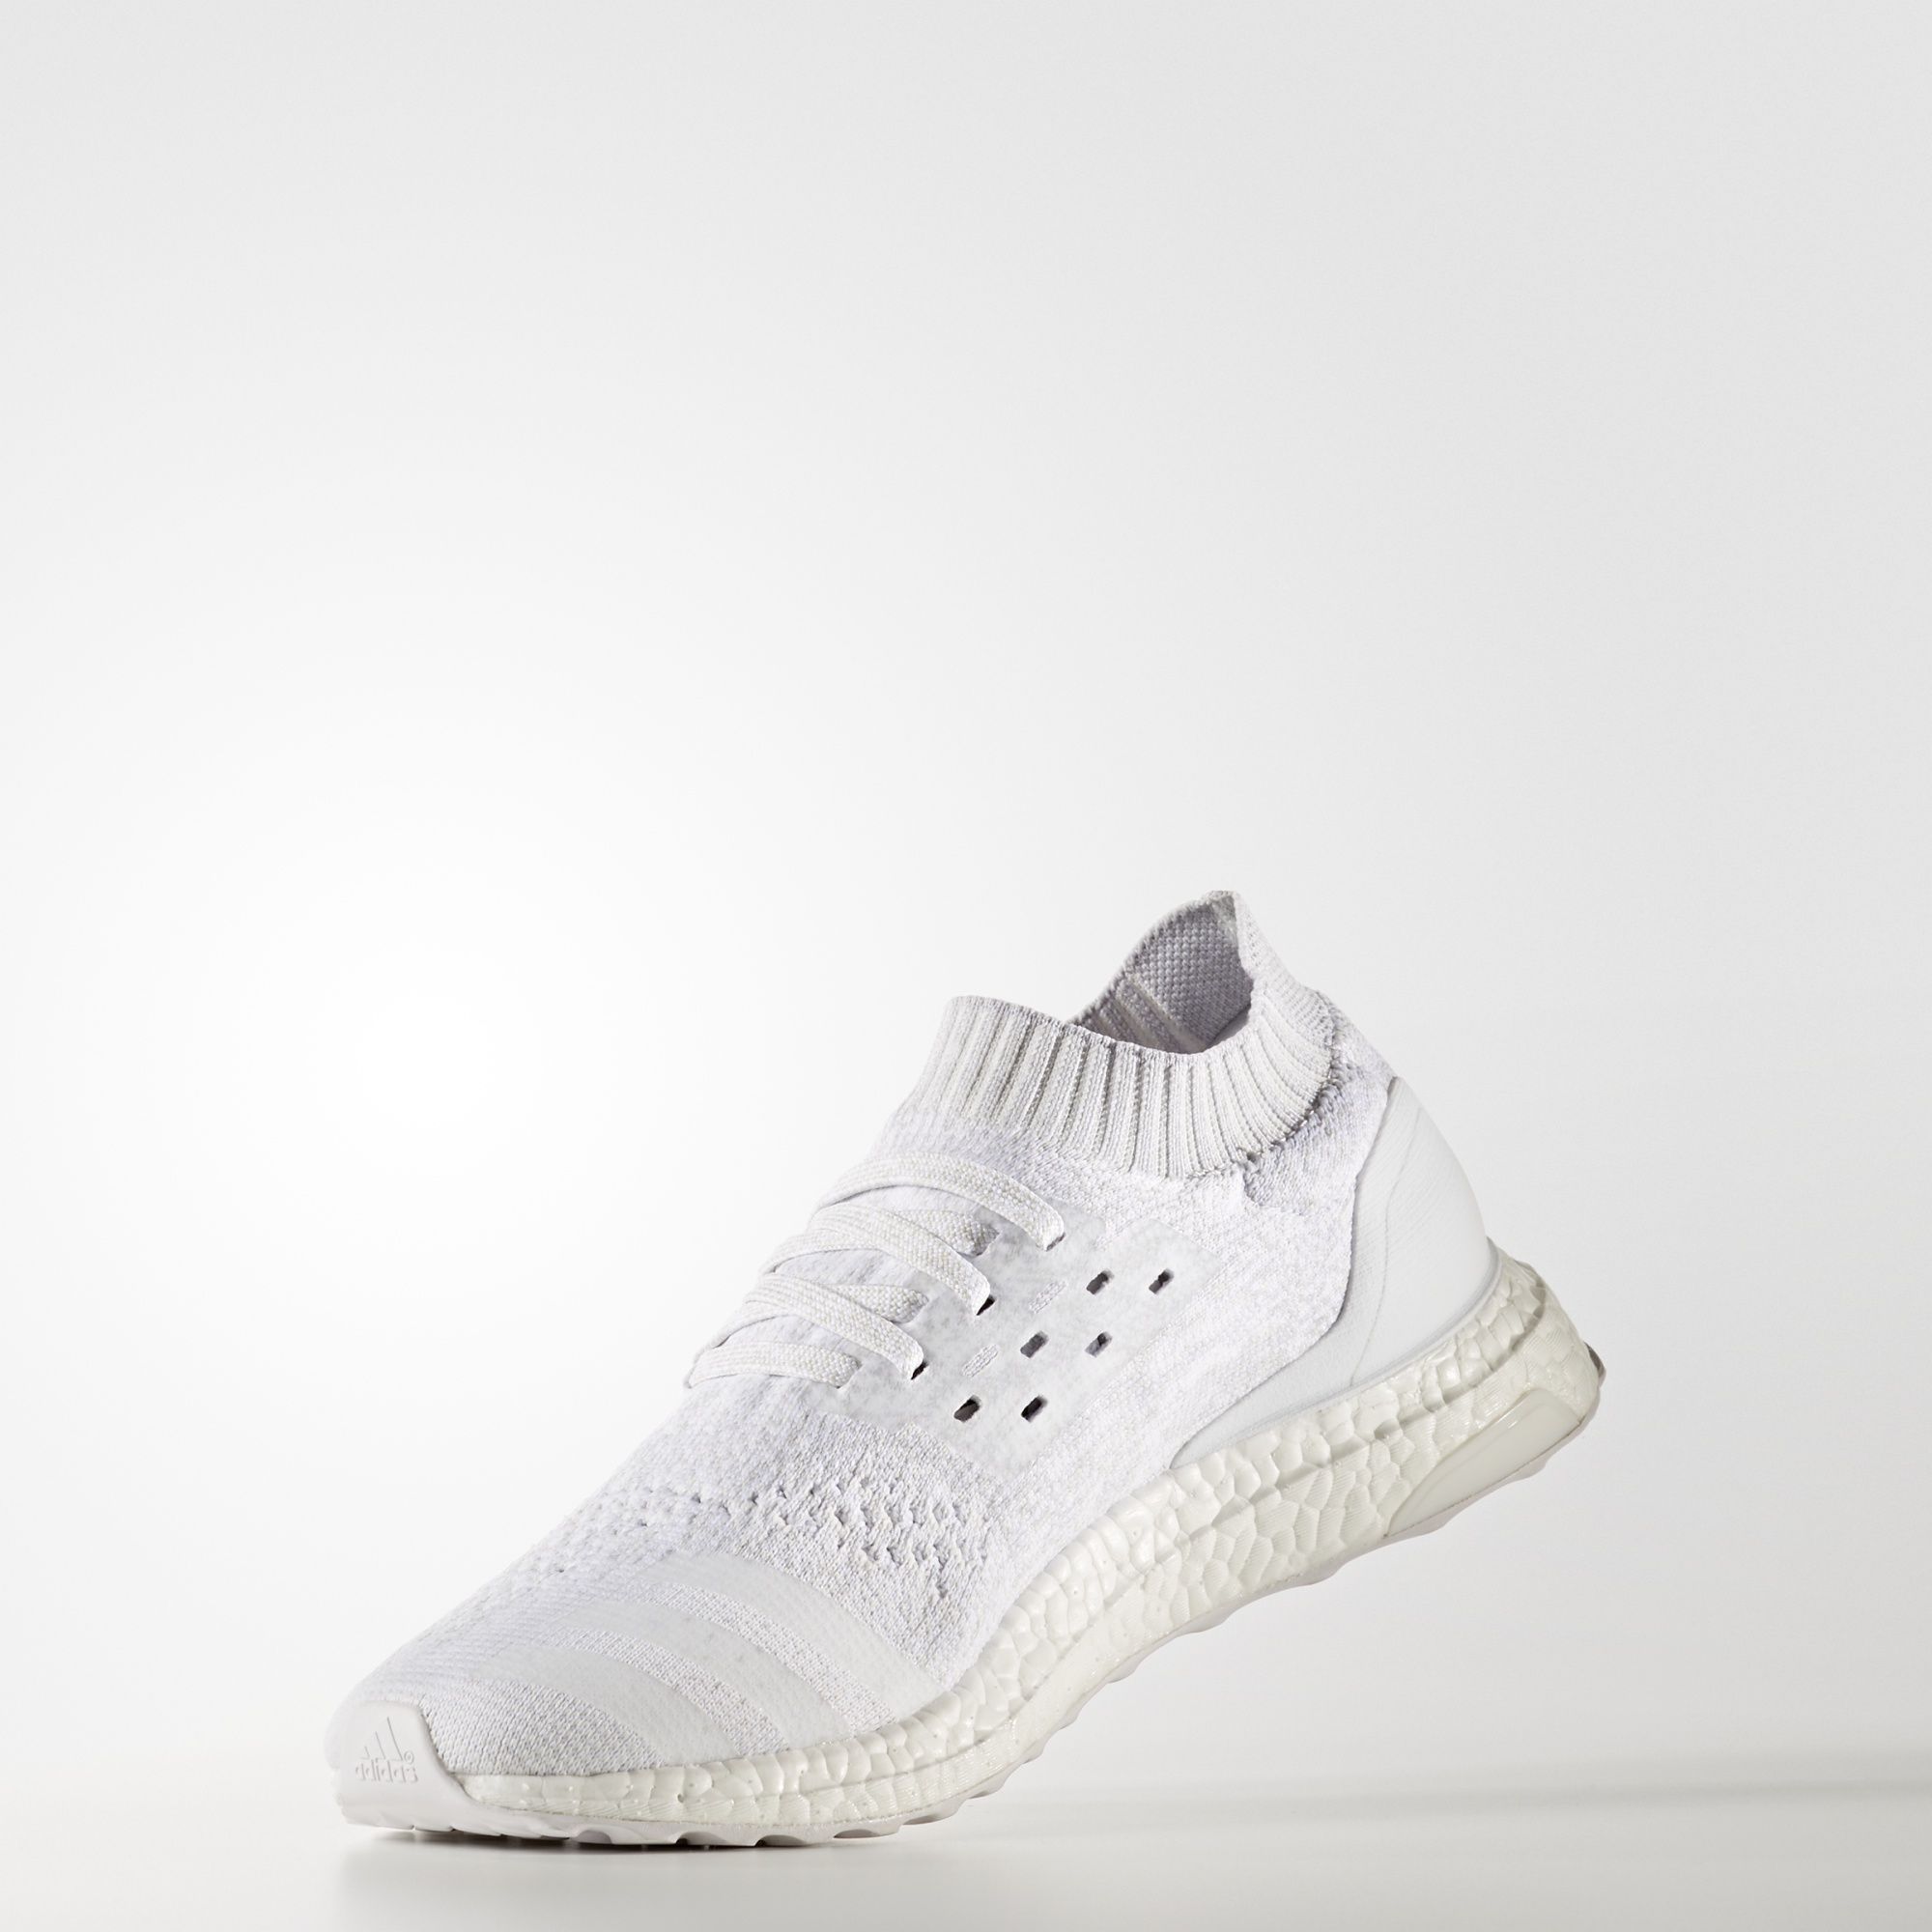 adidas-ultra-boost-uncaged-triple-white-3